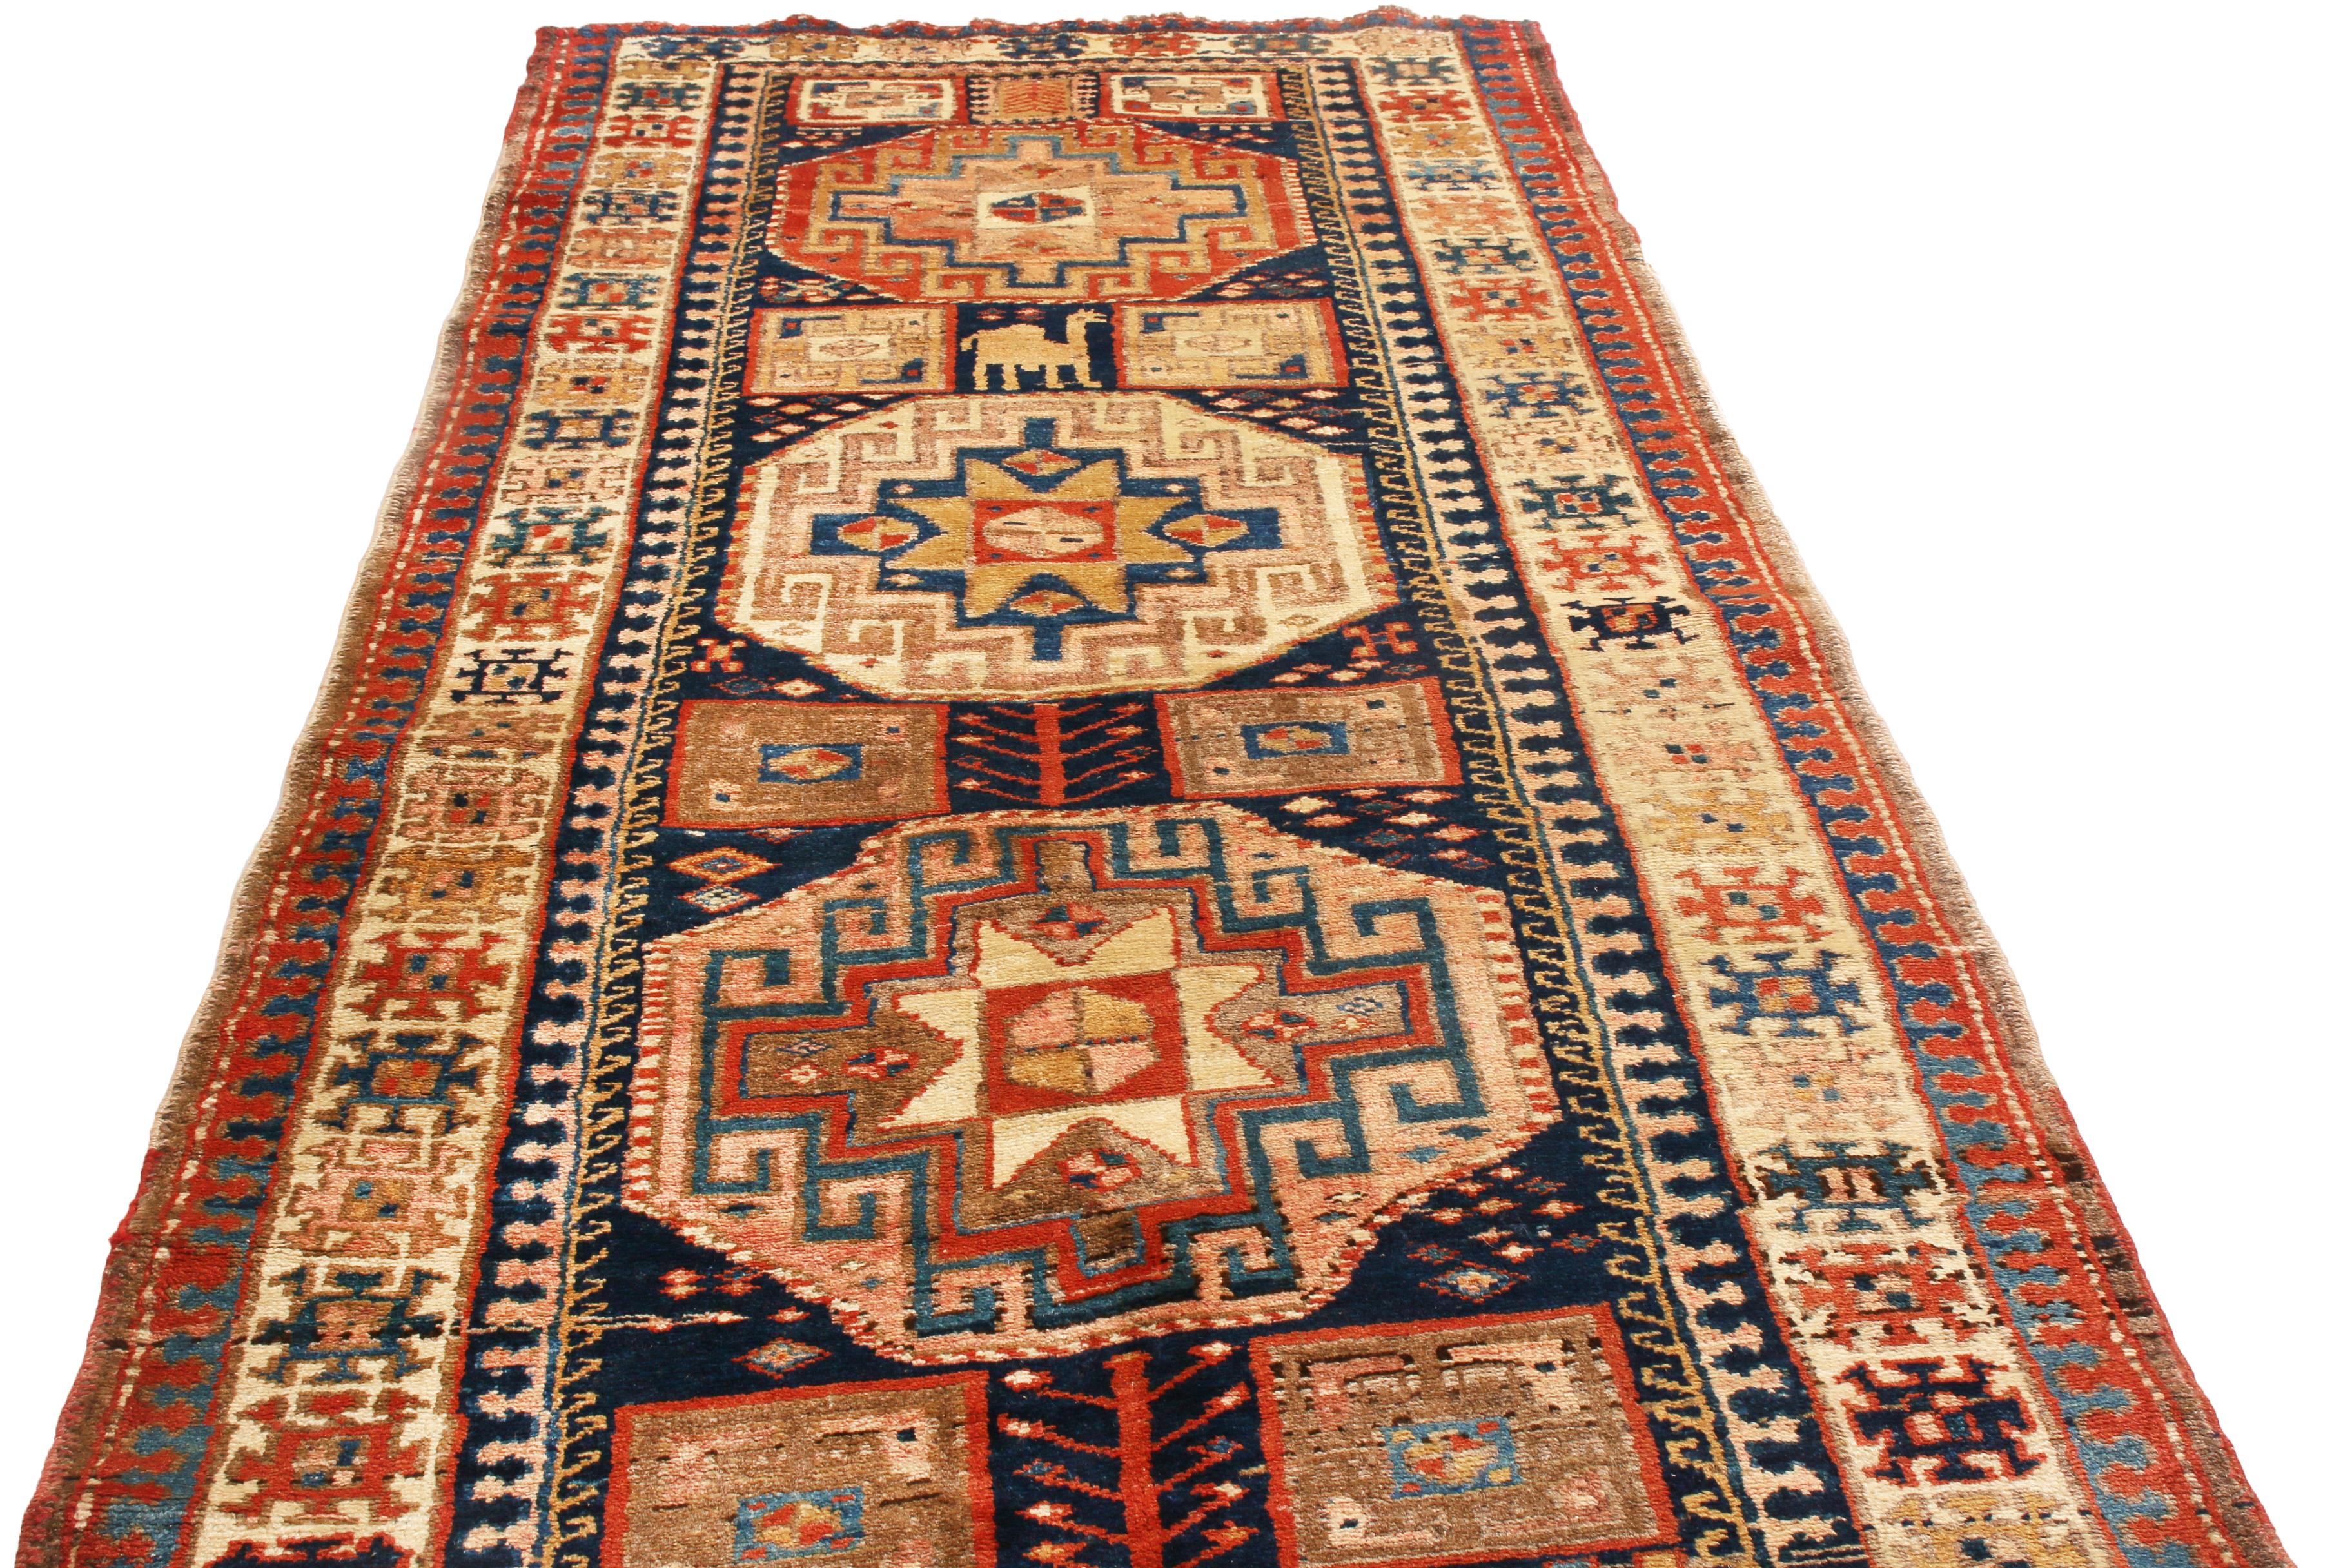 Originating from Persia in 1880, this hand knotted antique Persian wool runner features a distinct Northwest design, denoting a varied, traveled array of influences from Tehran, Tabriz, and other tribal regions of the 19th century. Complemented by